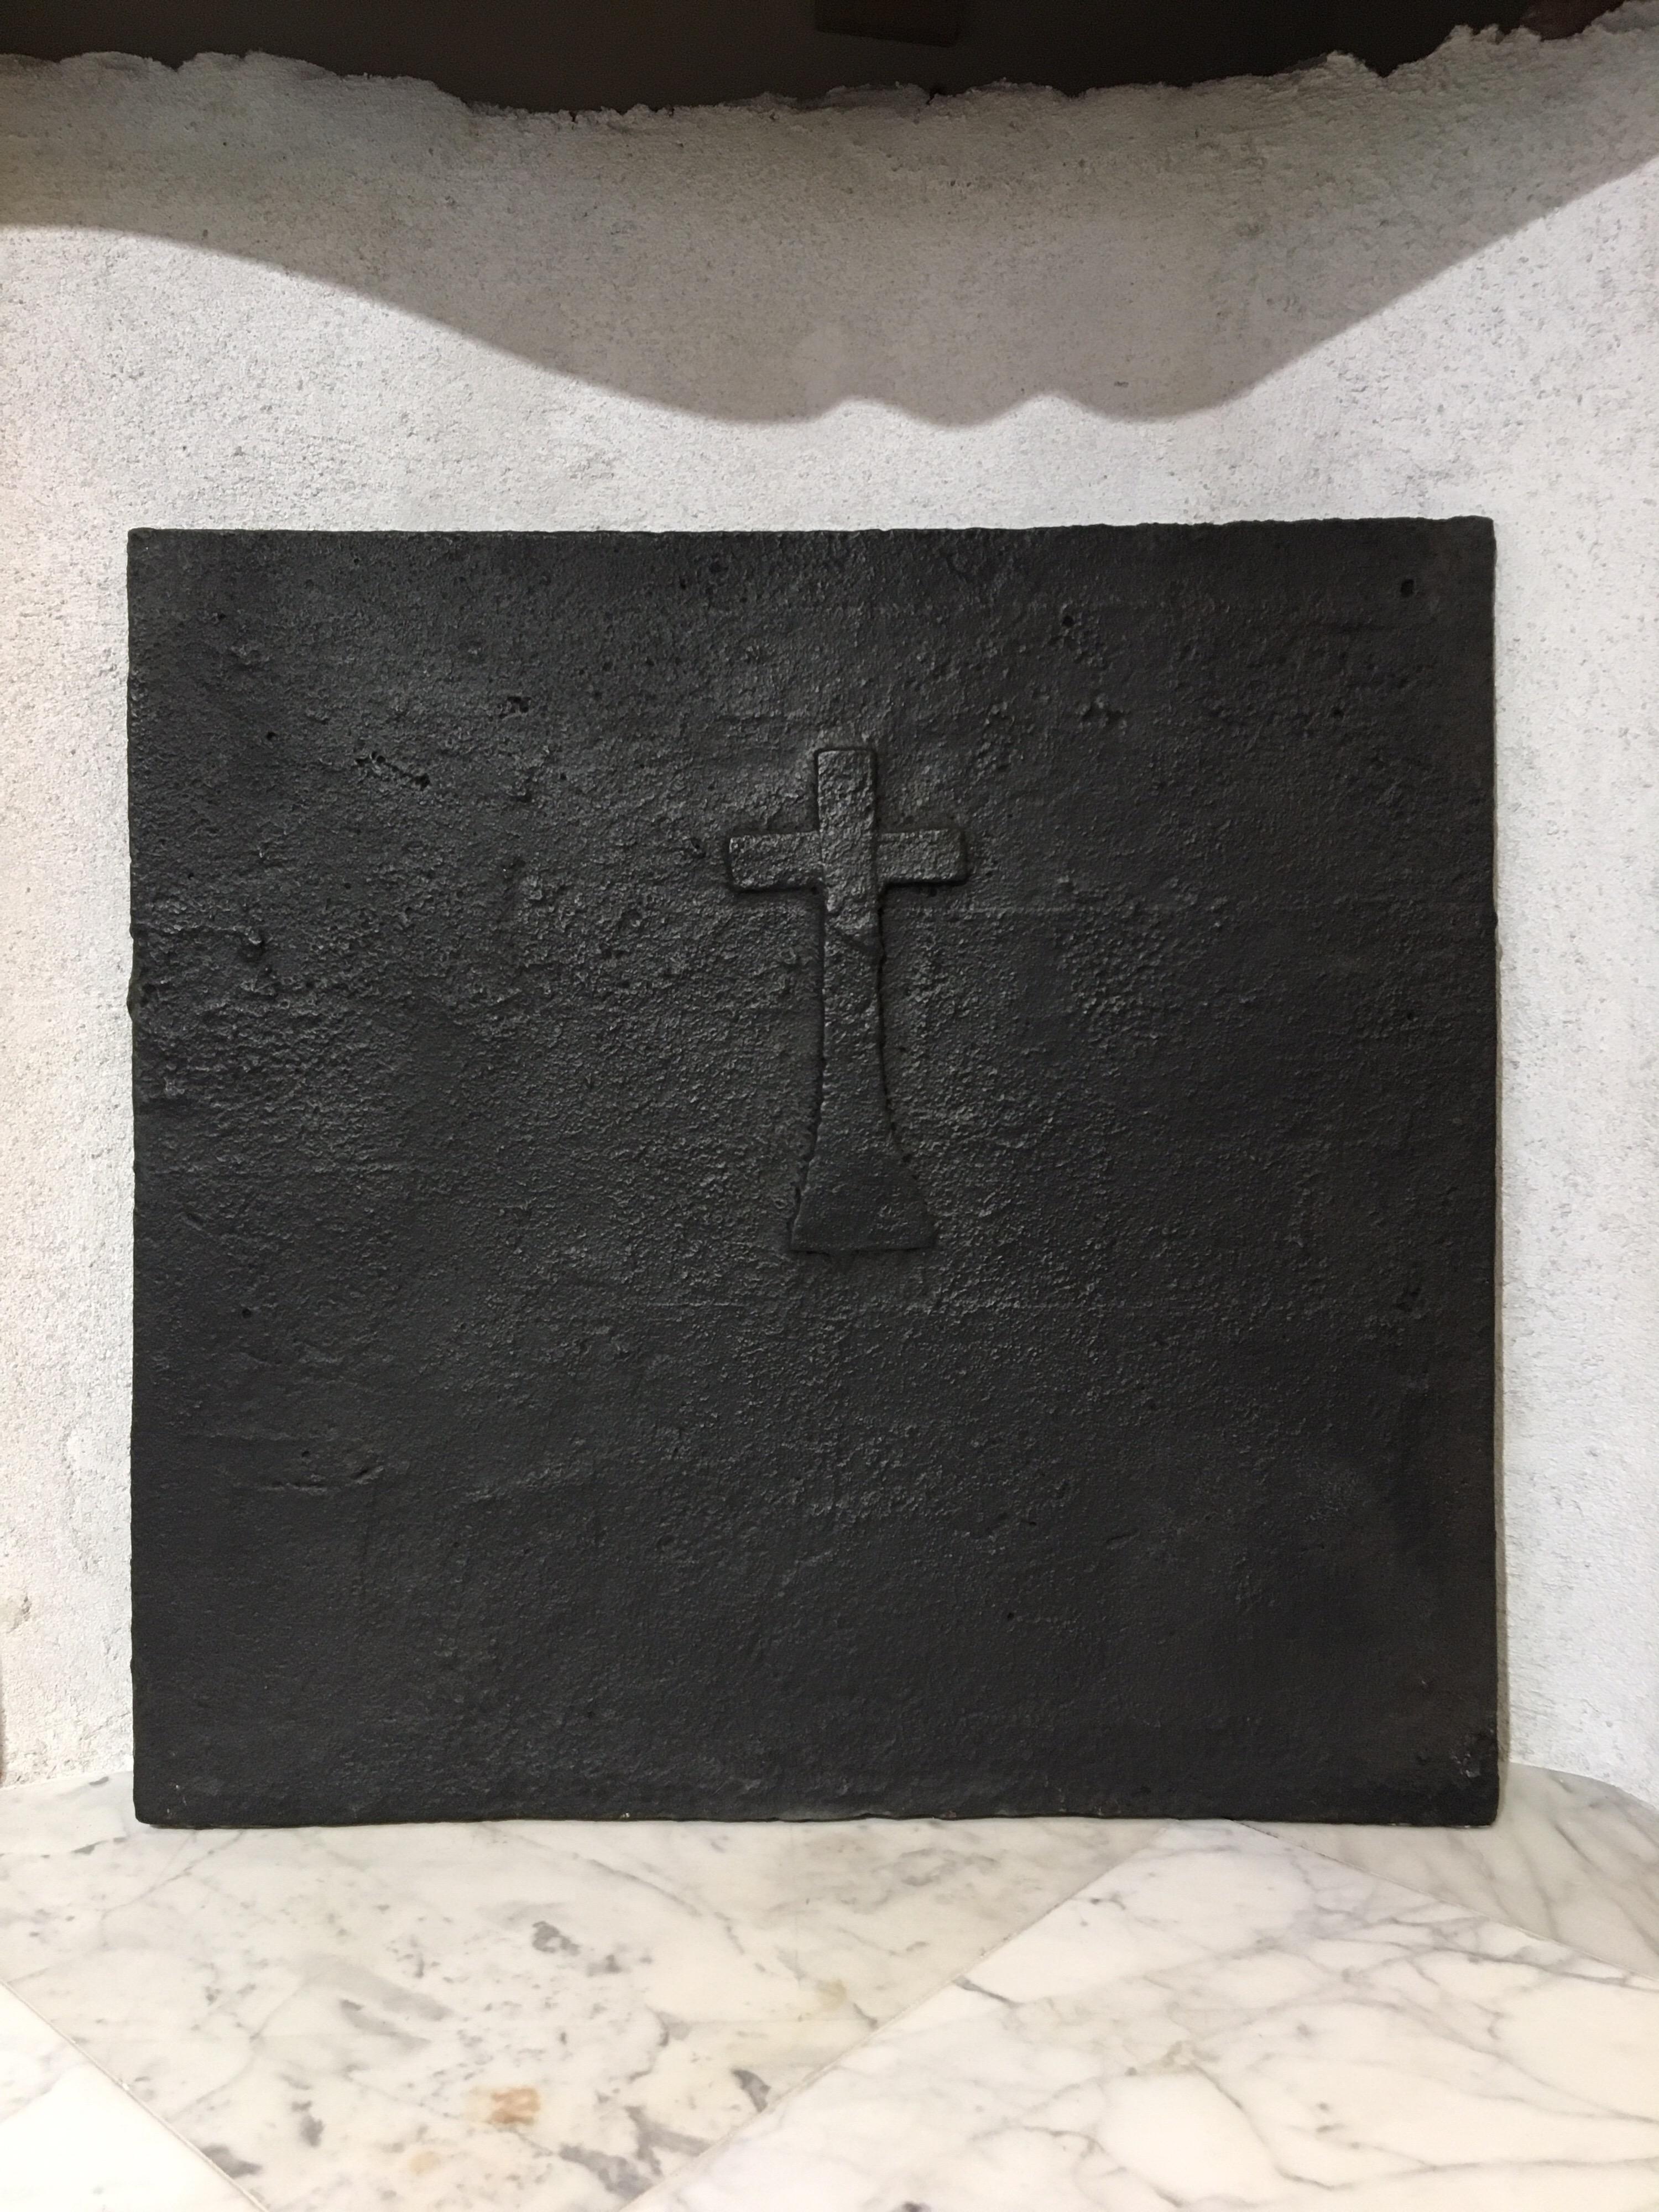 Superb antique cast iron fireback showing a cross.
This perfect sized fireback in great condition, the casting is sharp and crisp.

Really nice original patina!

This can be used in a real wood/gas burning fireplace or as backsplash.
Even as a